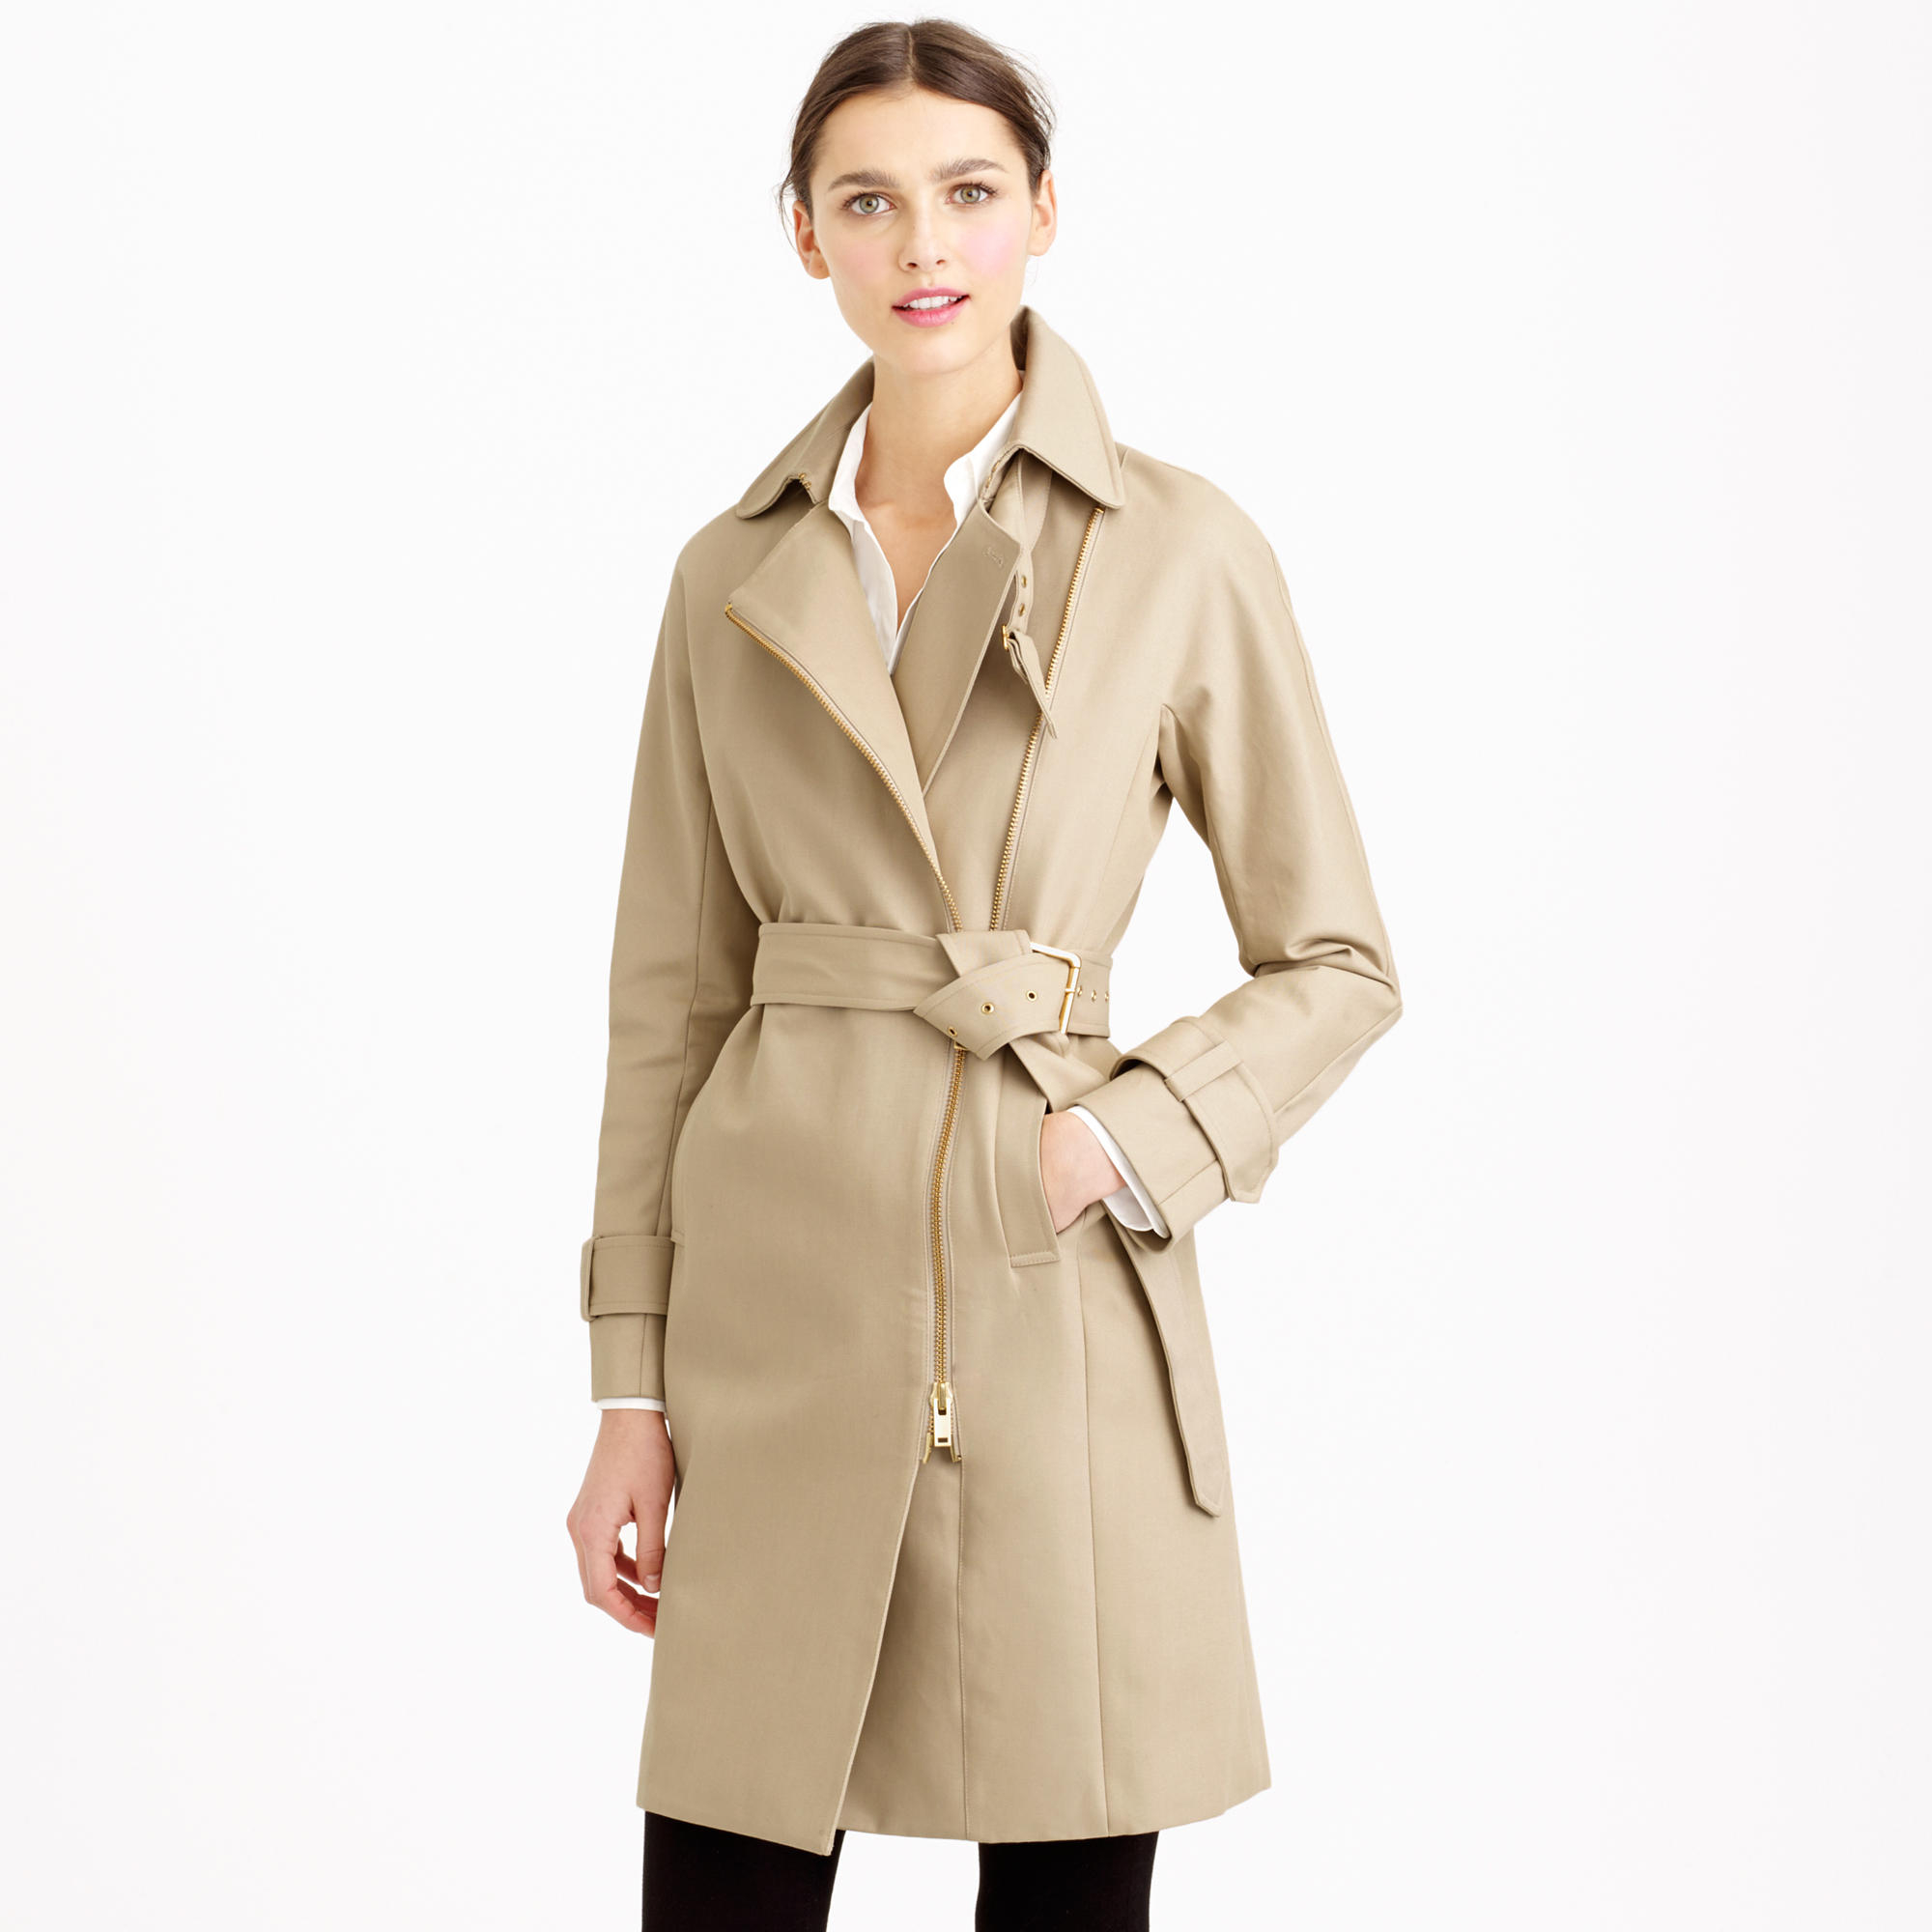 J.crew Collection Bonded Cotton Trench Coat in Natural | Lyst